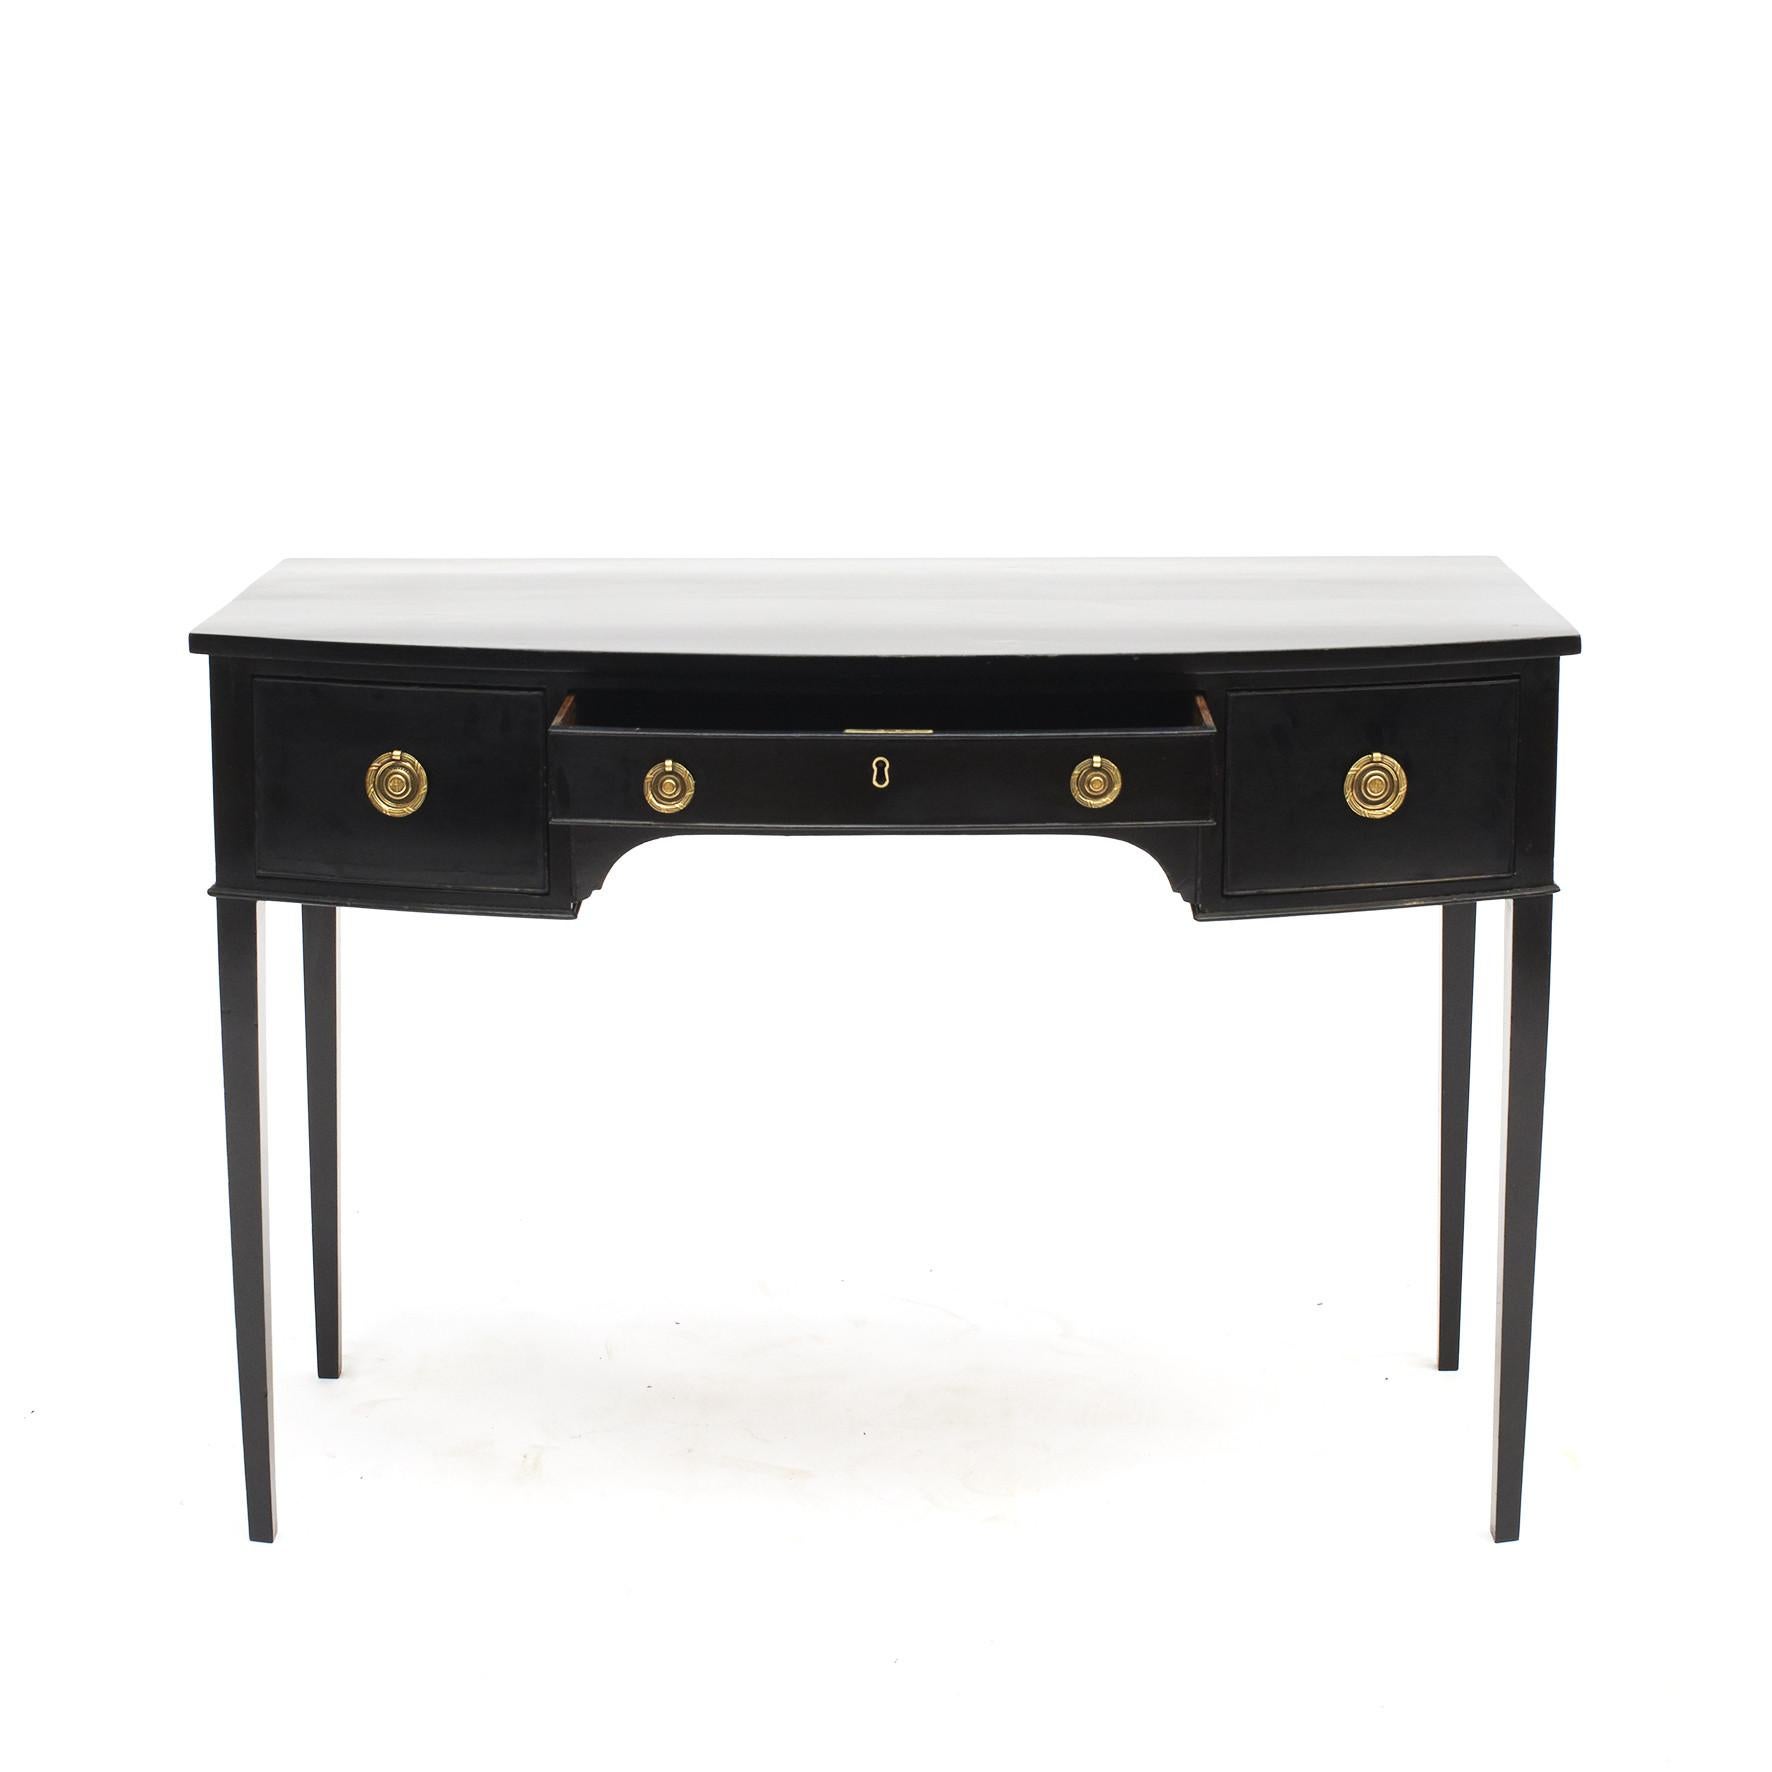 Regency console table with 3 drawers in black polished mahogany,
England, 1810-1820.